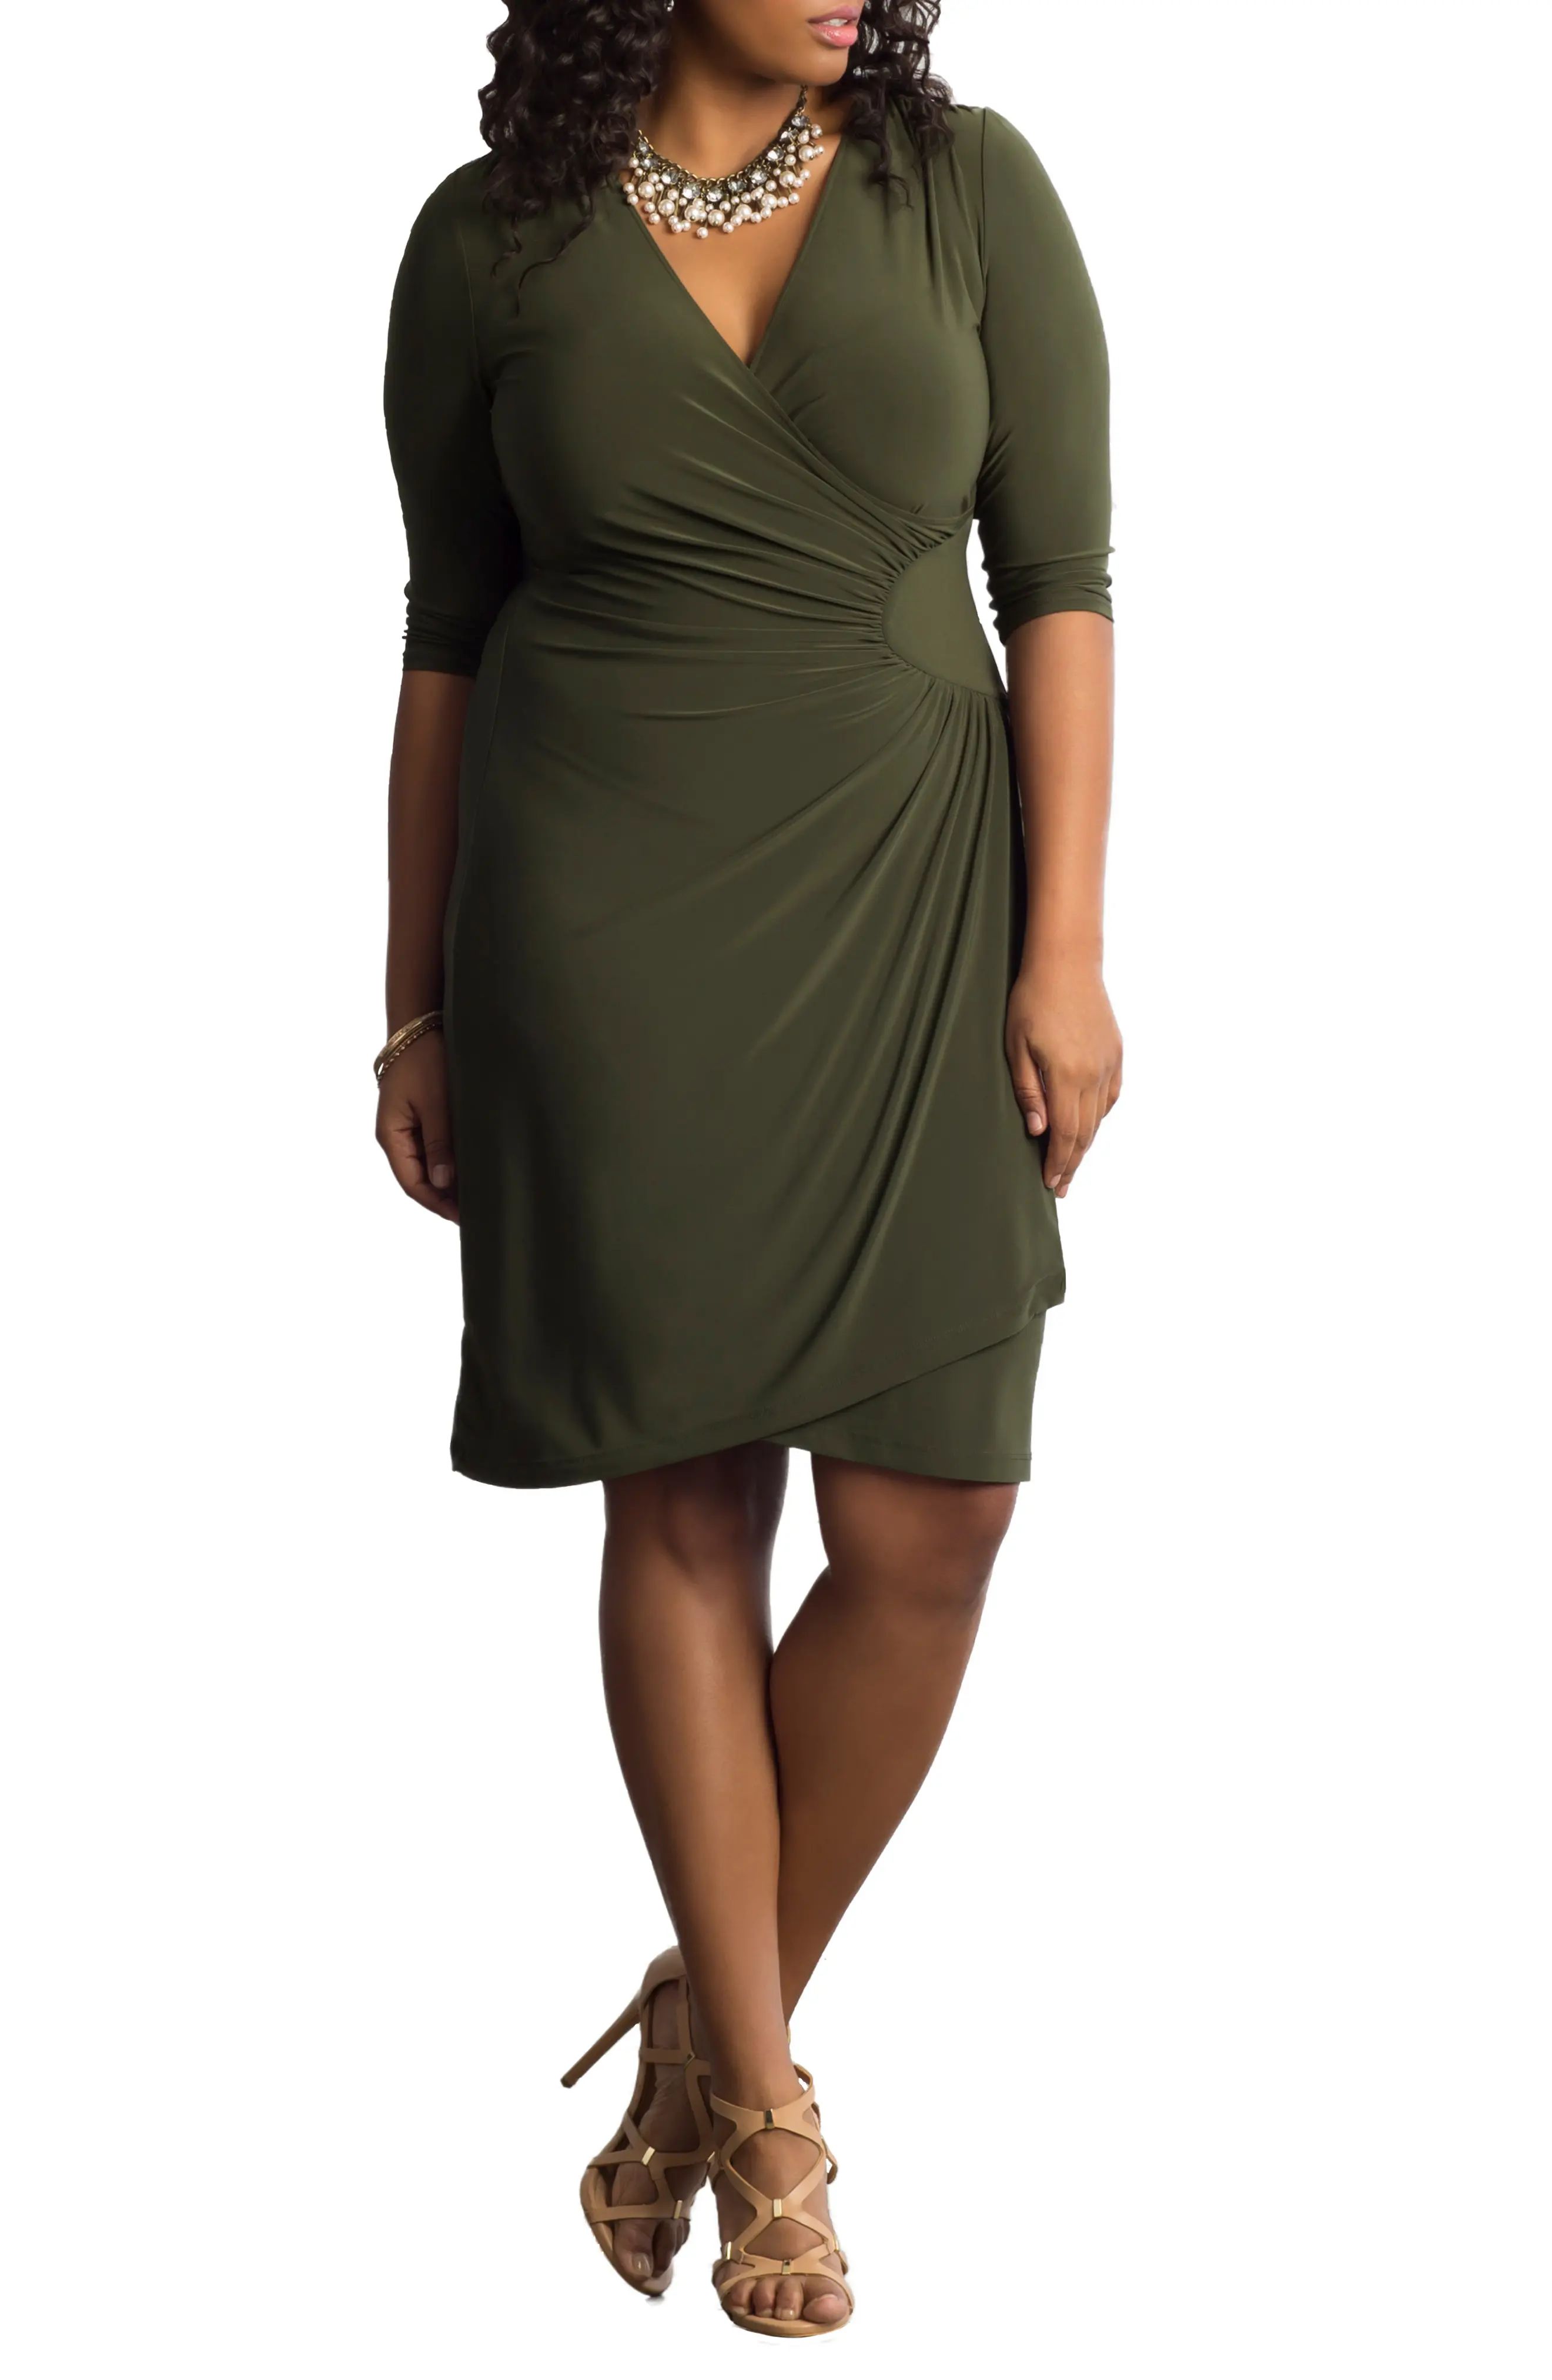 Kiyonna Ciara Floral Cinch Waist Jersey Dress, Size 1X in Olive at Nordstrom | Nordstrom